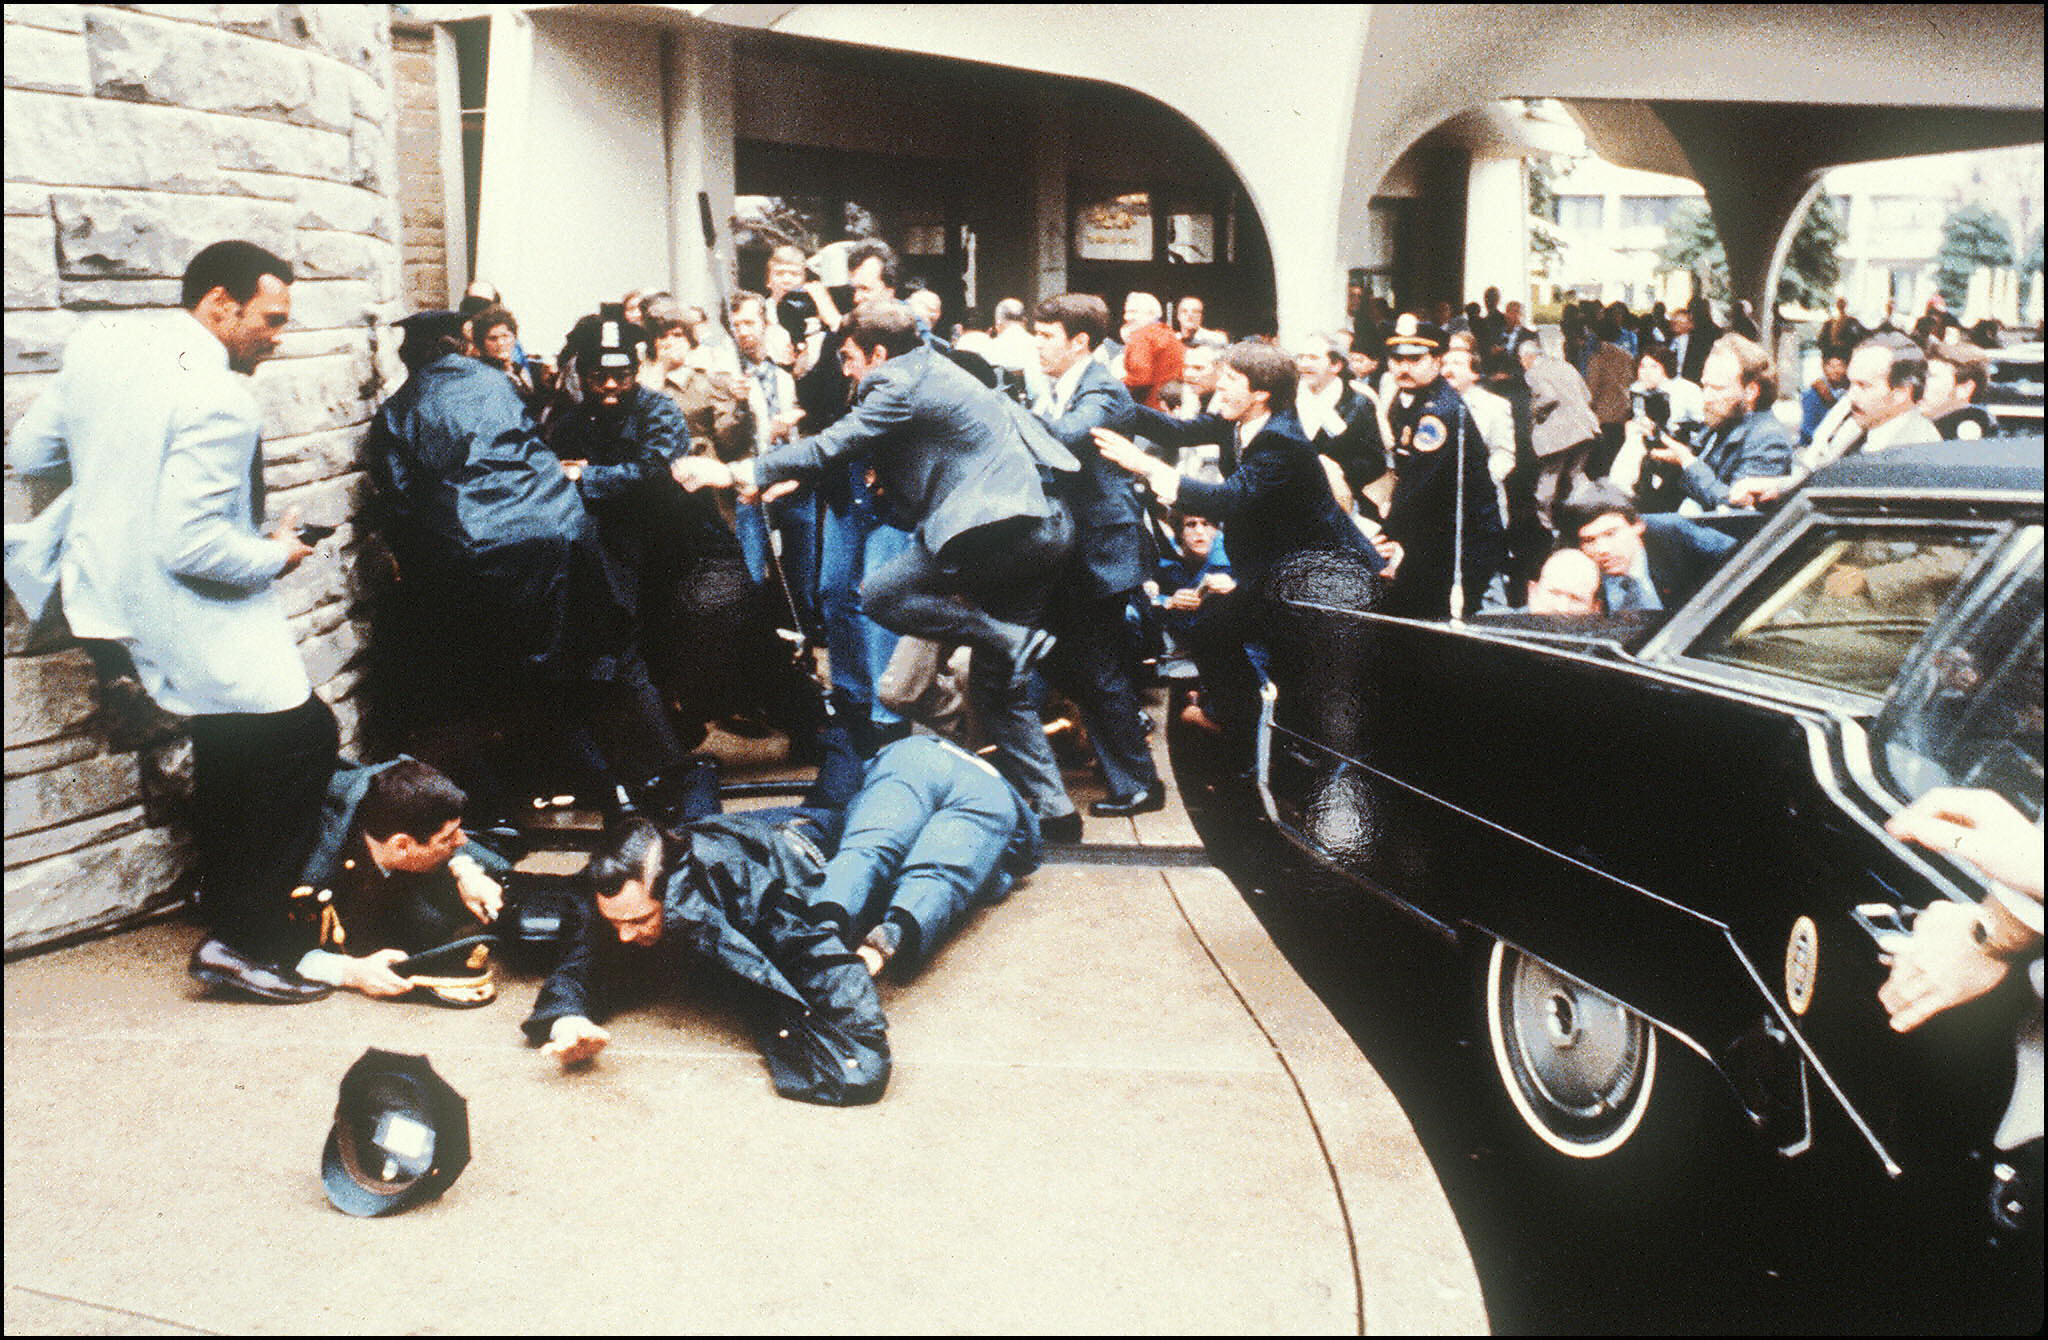 PHOTO: Police and Secret Service agent react during the assassination attempt on President Ronald Reagan on March 30, 1981 outside the Hilton Hotel in Washington, D.C.